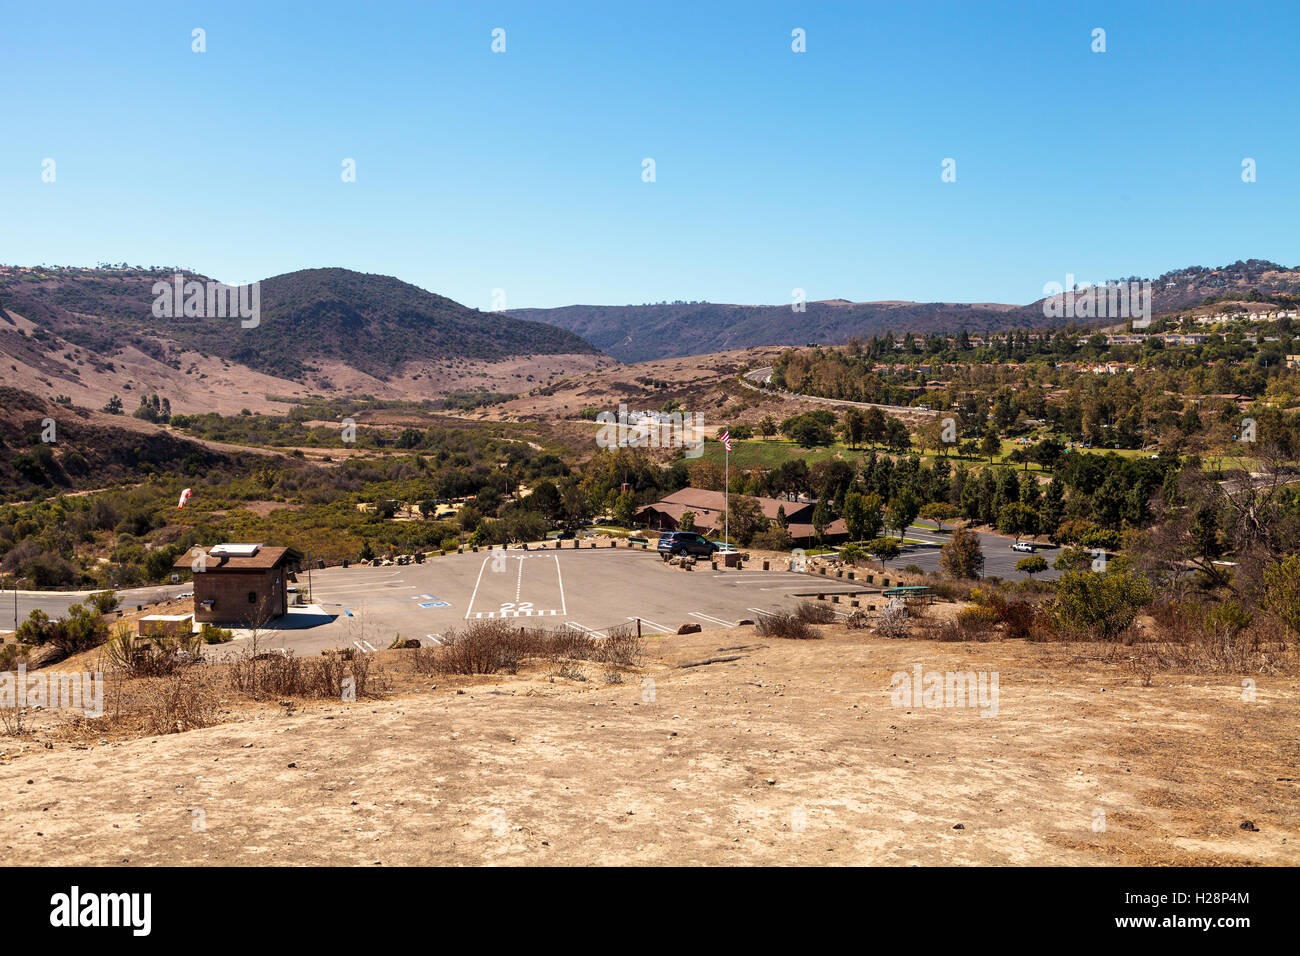 Aliso Viejo Wilderness Park view from the top hill in Aliso Viejo, California, United States Stock Photo